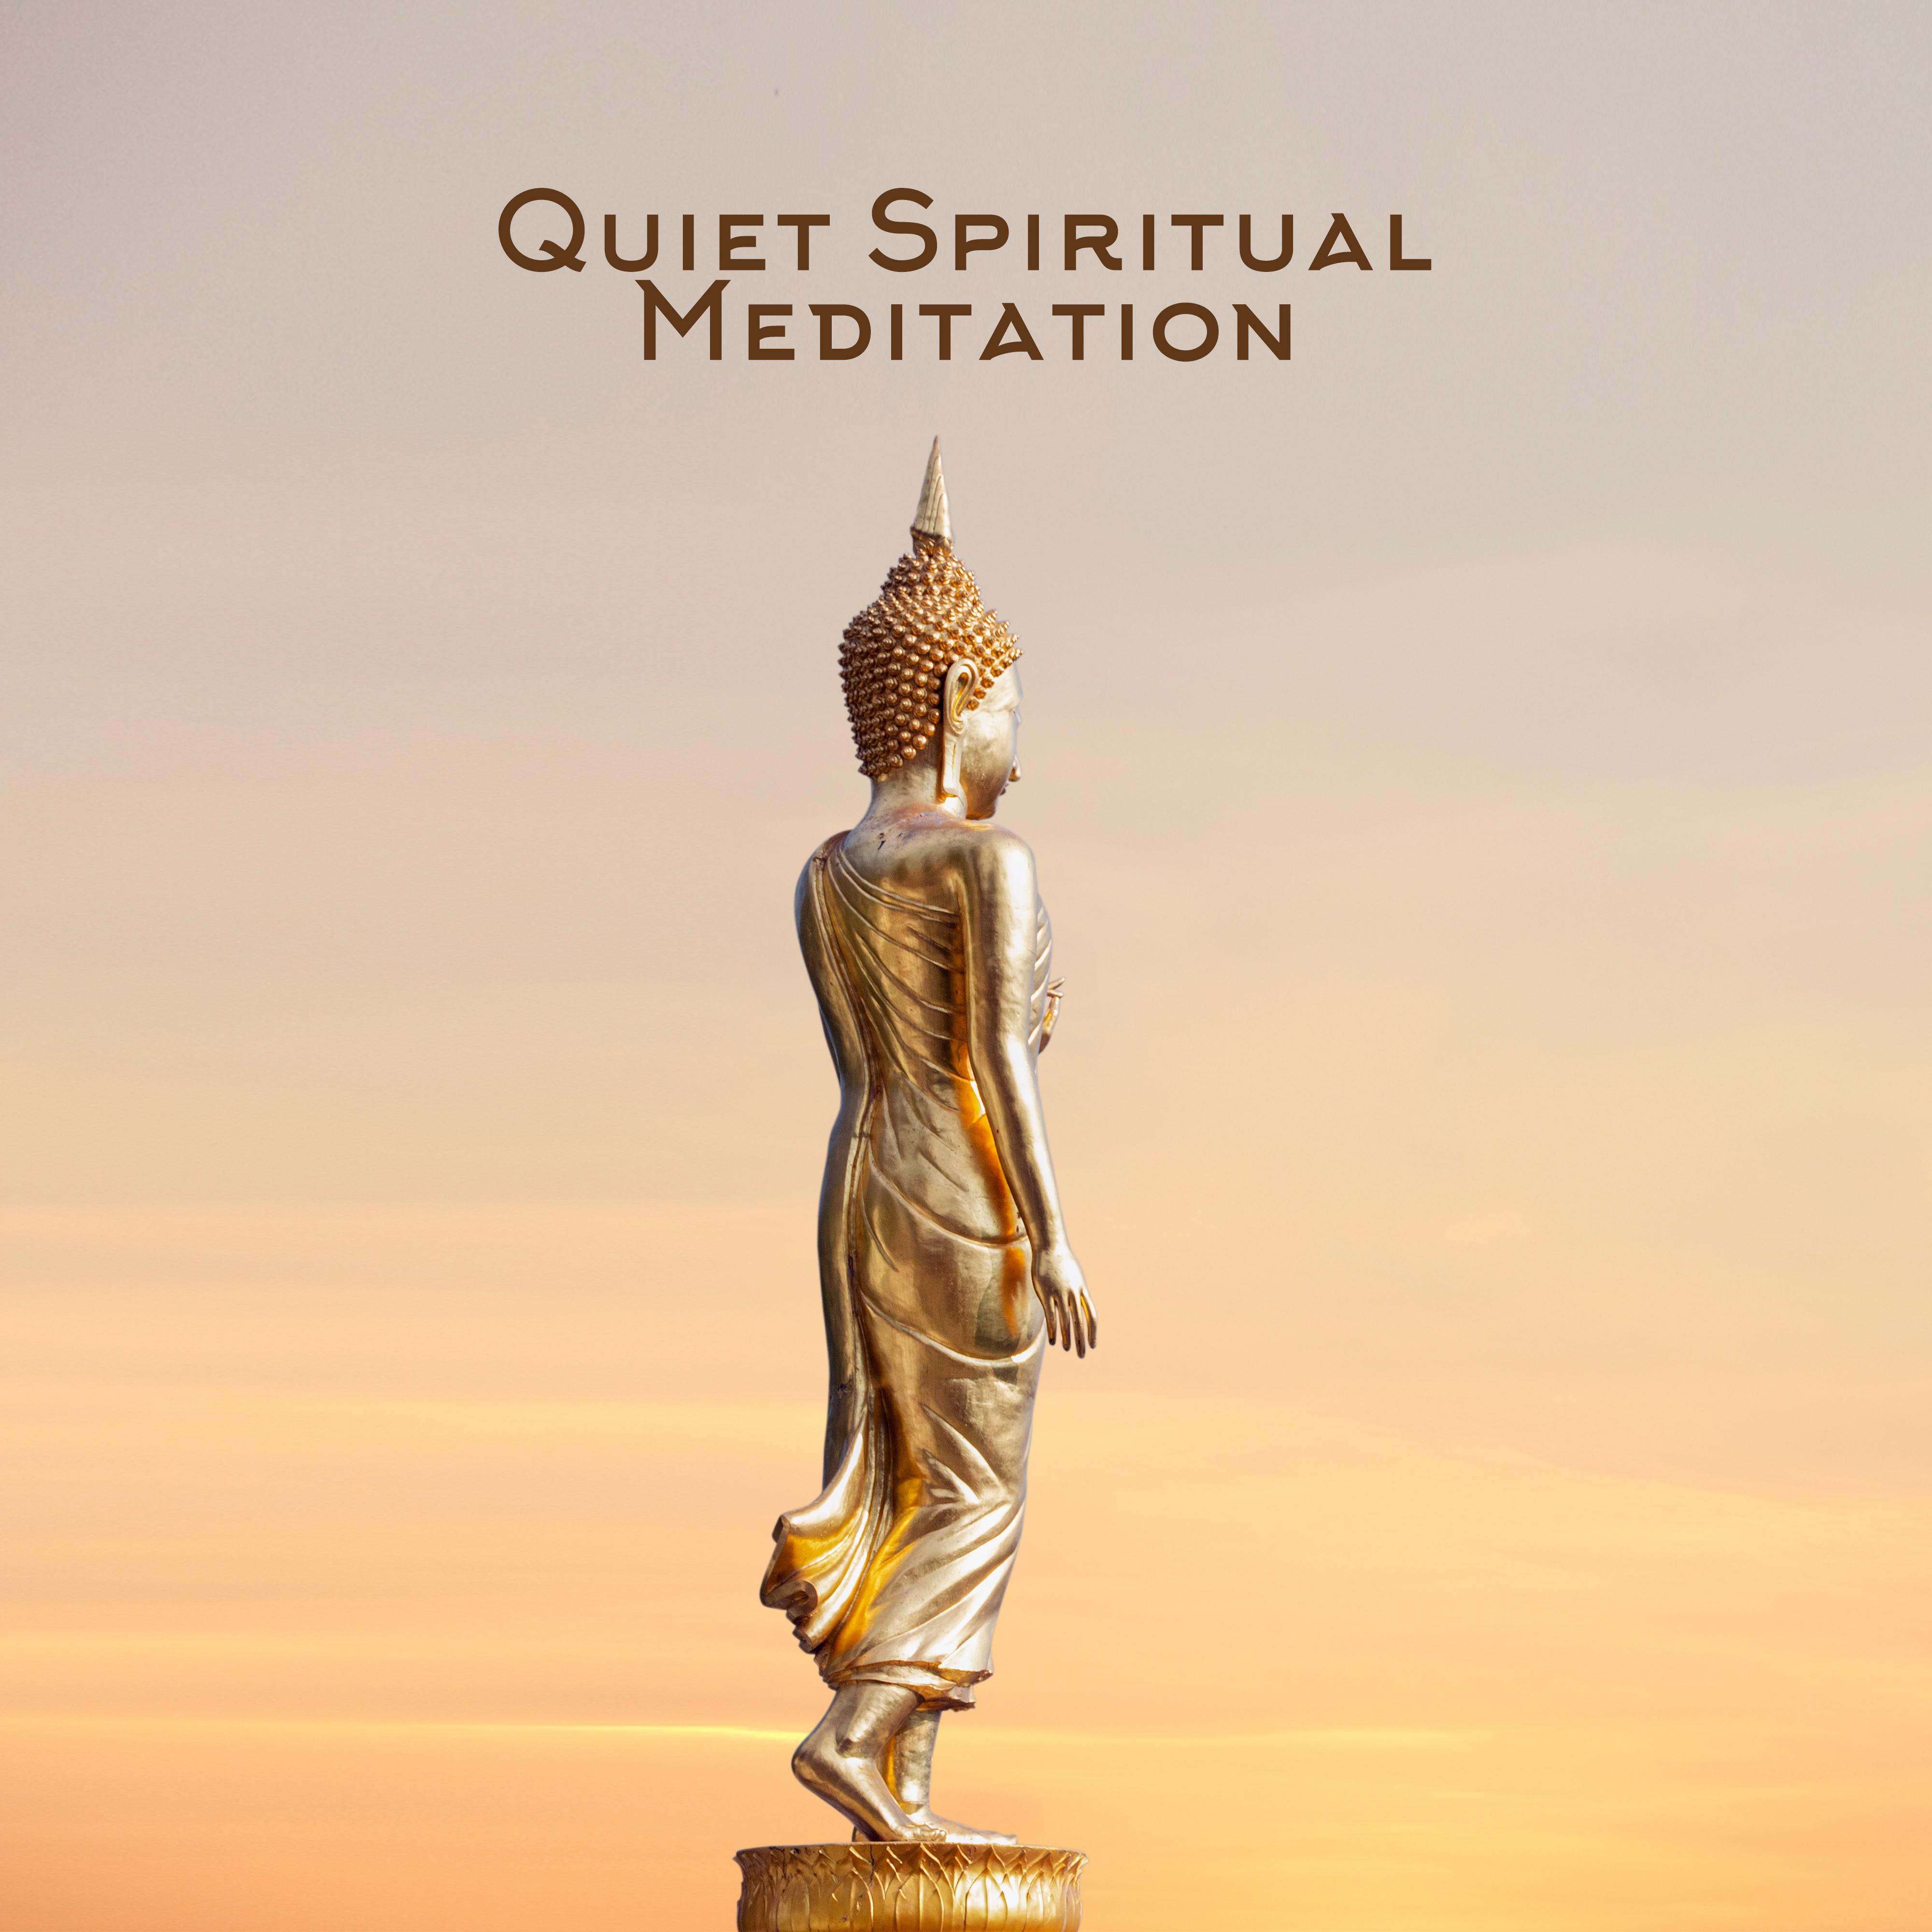 Quiet Spiritual Meditation: Relaxing Music for Buddhist Meditation, Yoga Practice, Inner Cleansing and Release from the Negative Influence of Thoughts and Emotions